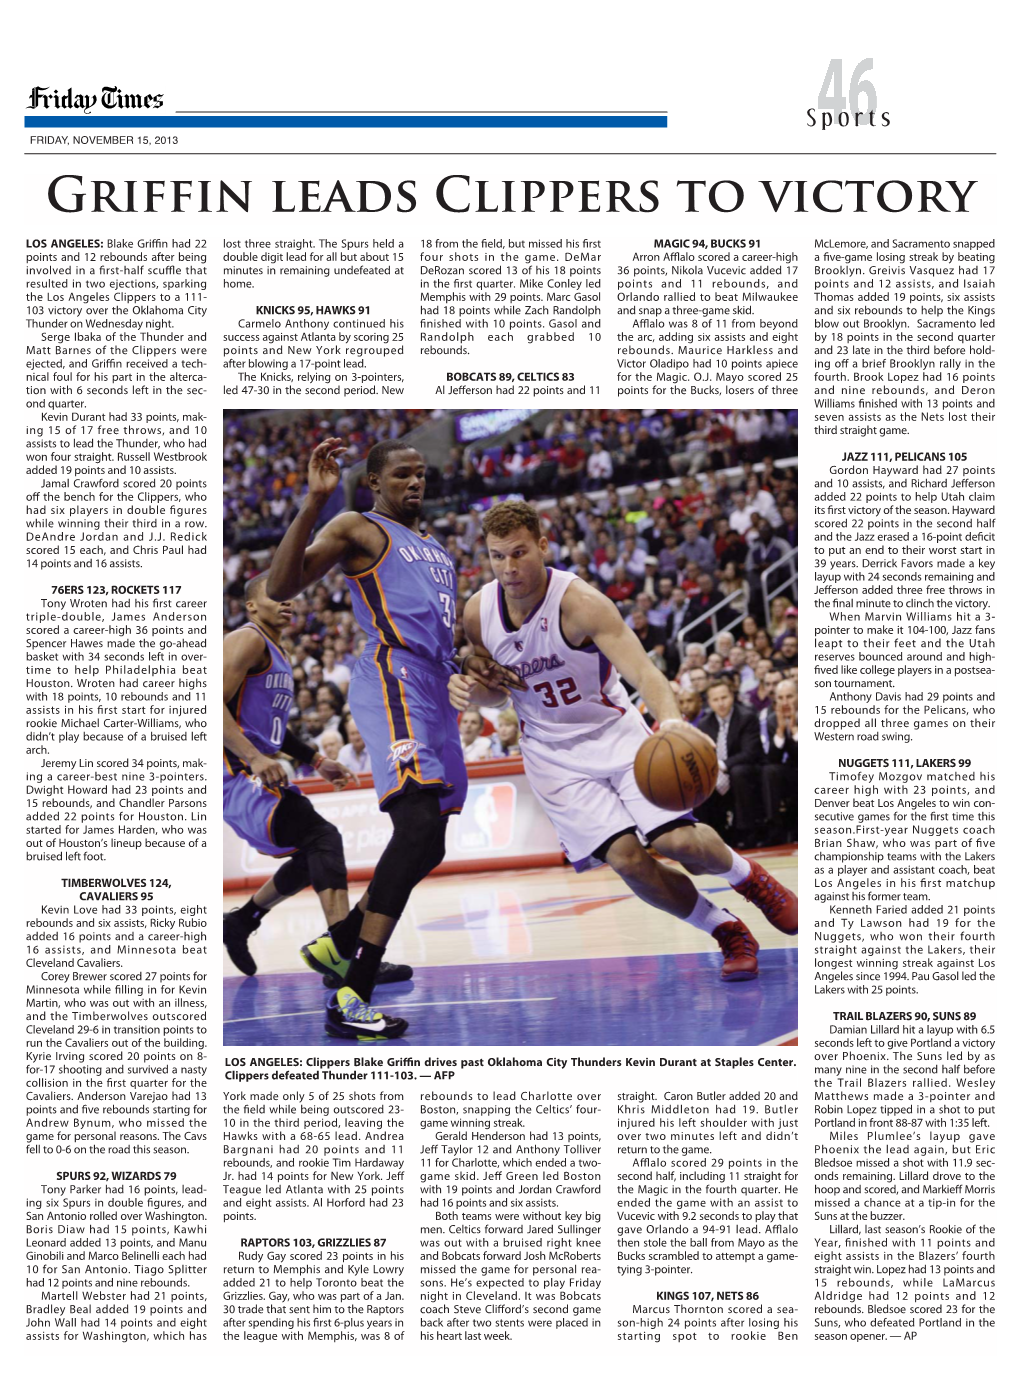 Griffin Leads Clippers to Victory